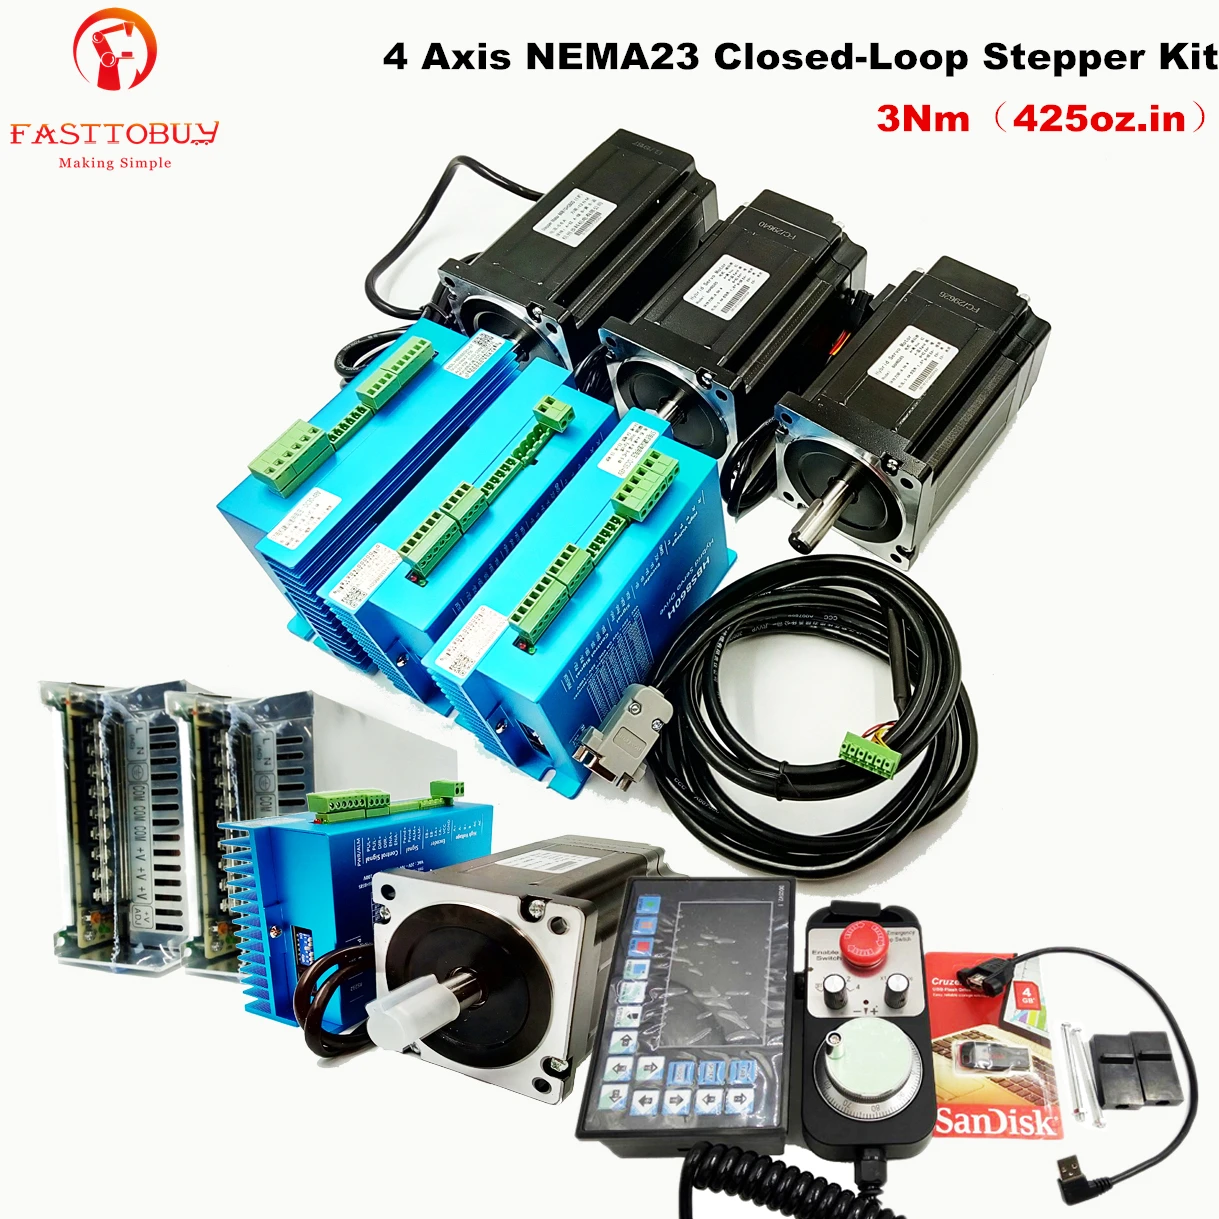 3NM DSP Closed Loop Stepper Motor Nema23 Drive 428oz-in Power Supply RS232 Cable 